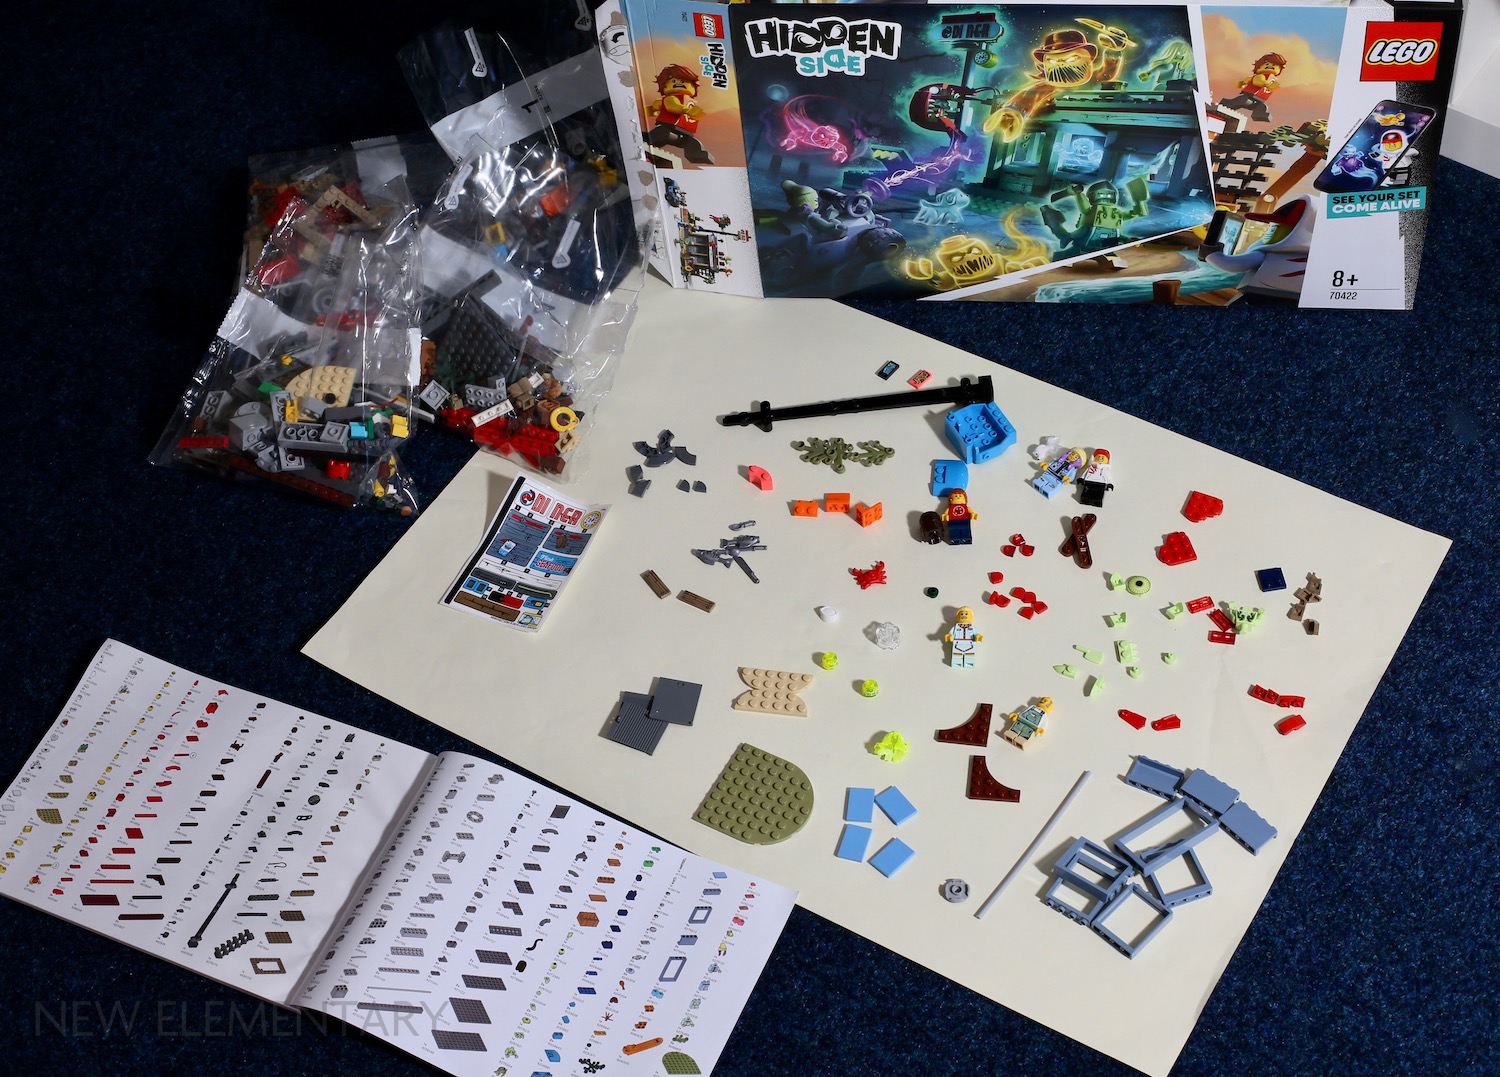 LEGO® Hidden Side review: 70422 Shrimp Shack | New Elementary: LEGO® parts, sets and techniques